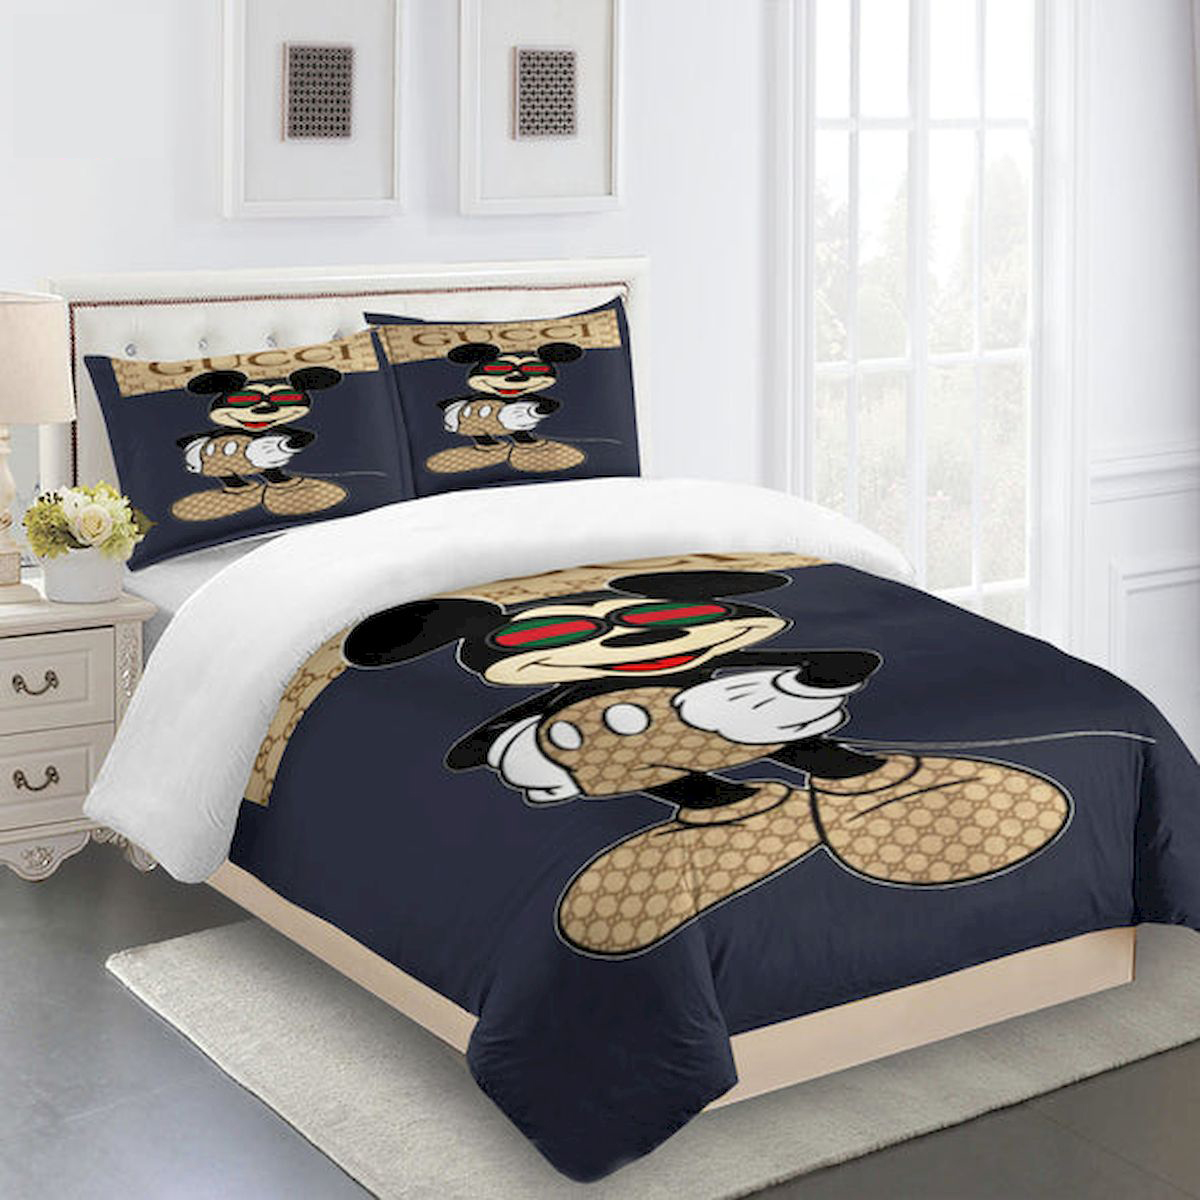 GC Mickey Mouse Luxury Brand High-End Bedding Set Disney Gifts Home Decor HT